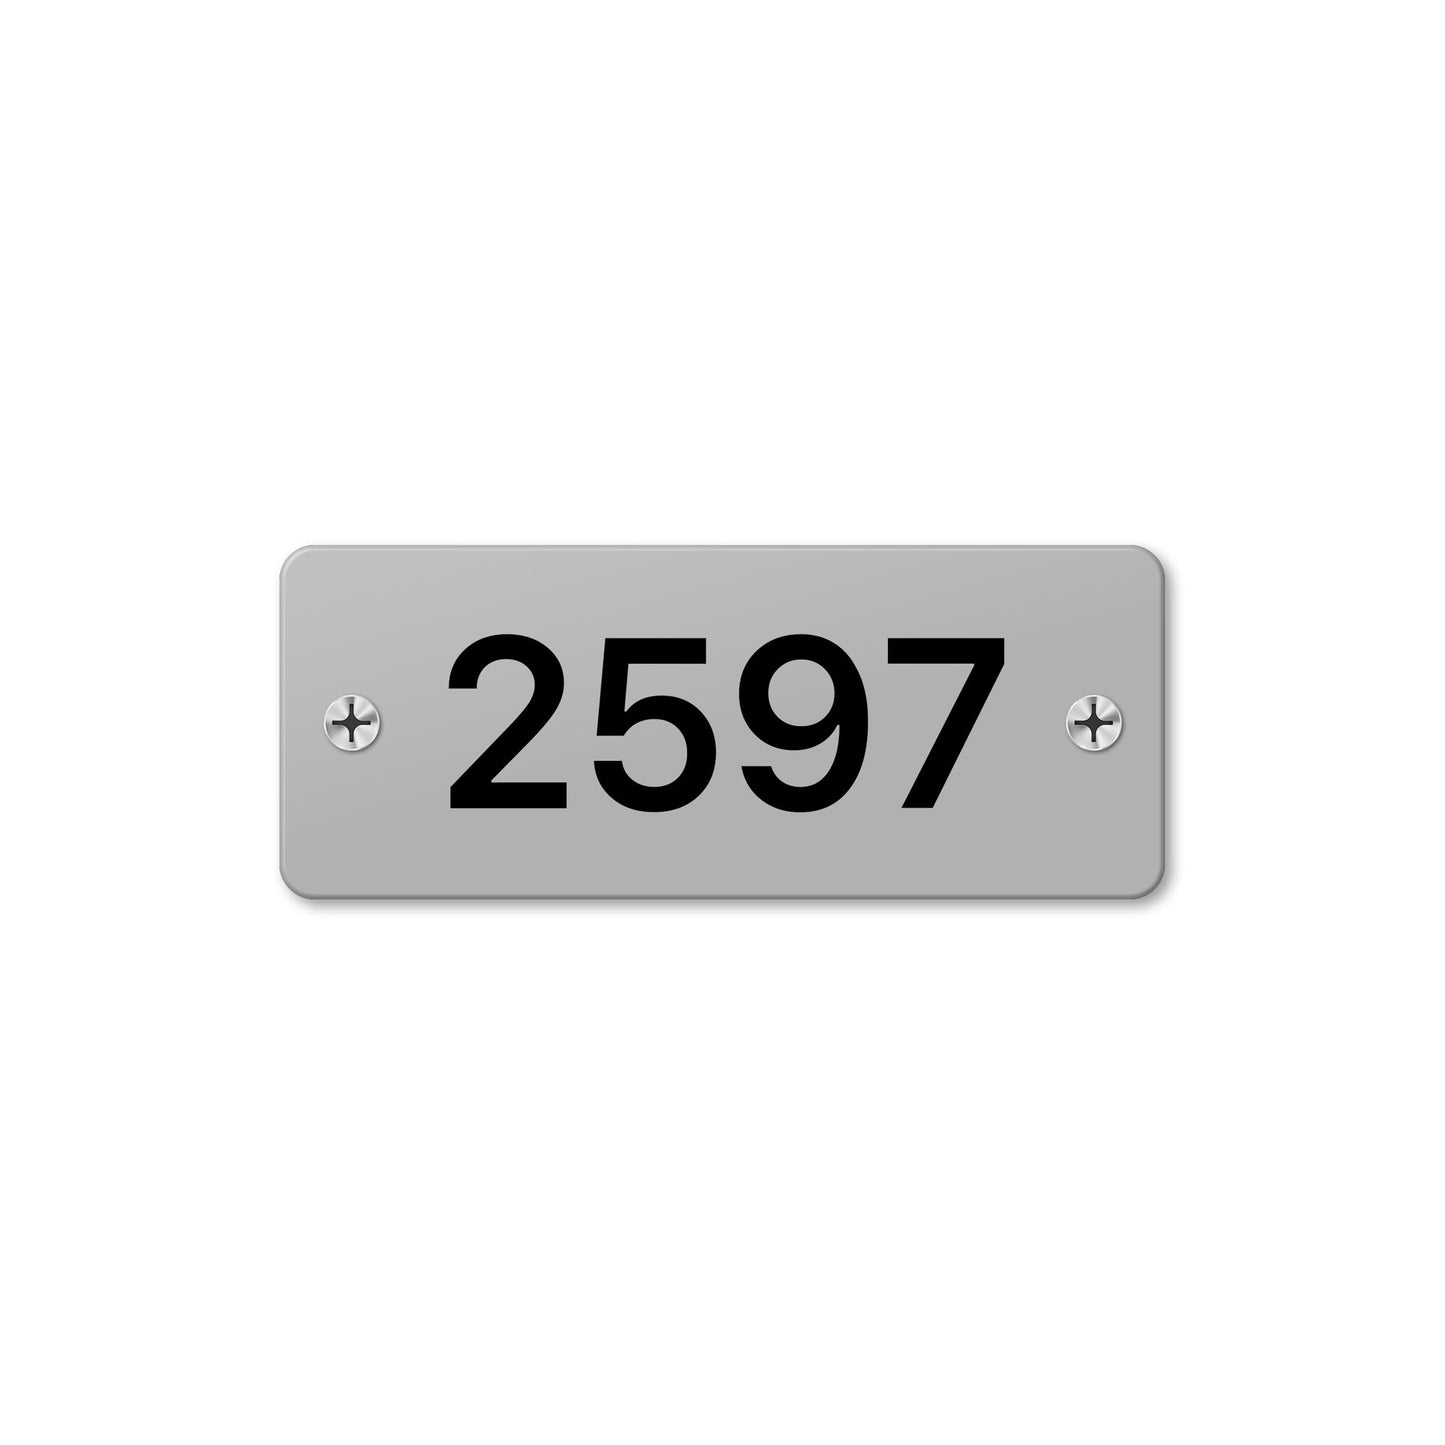 Numeral 2597